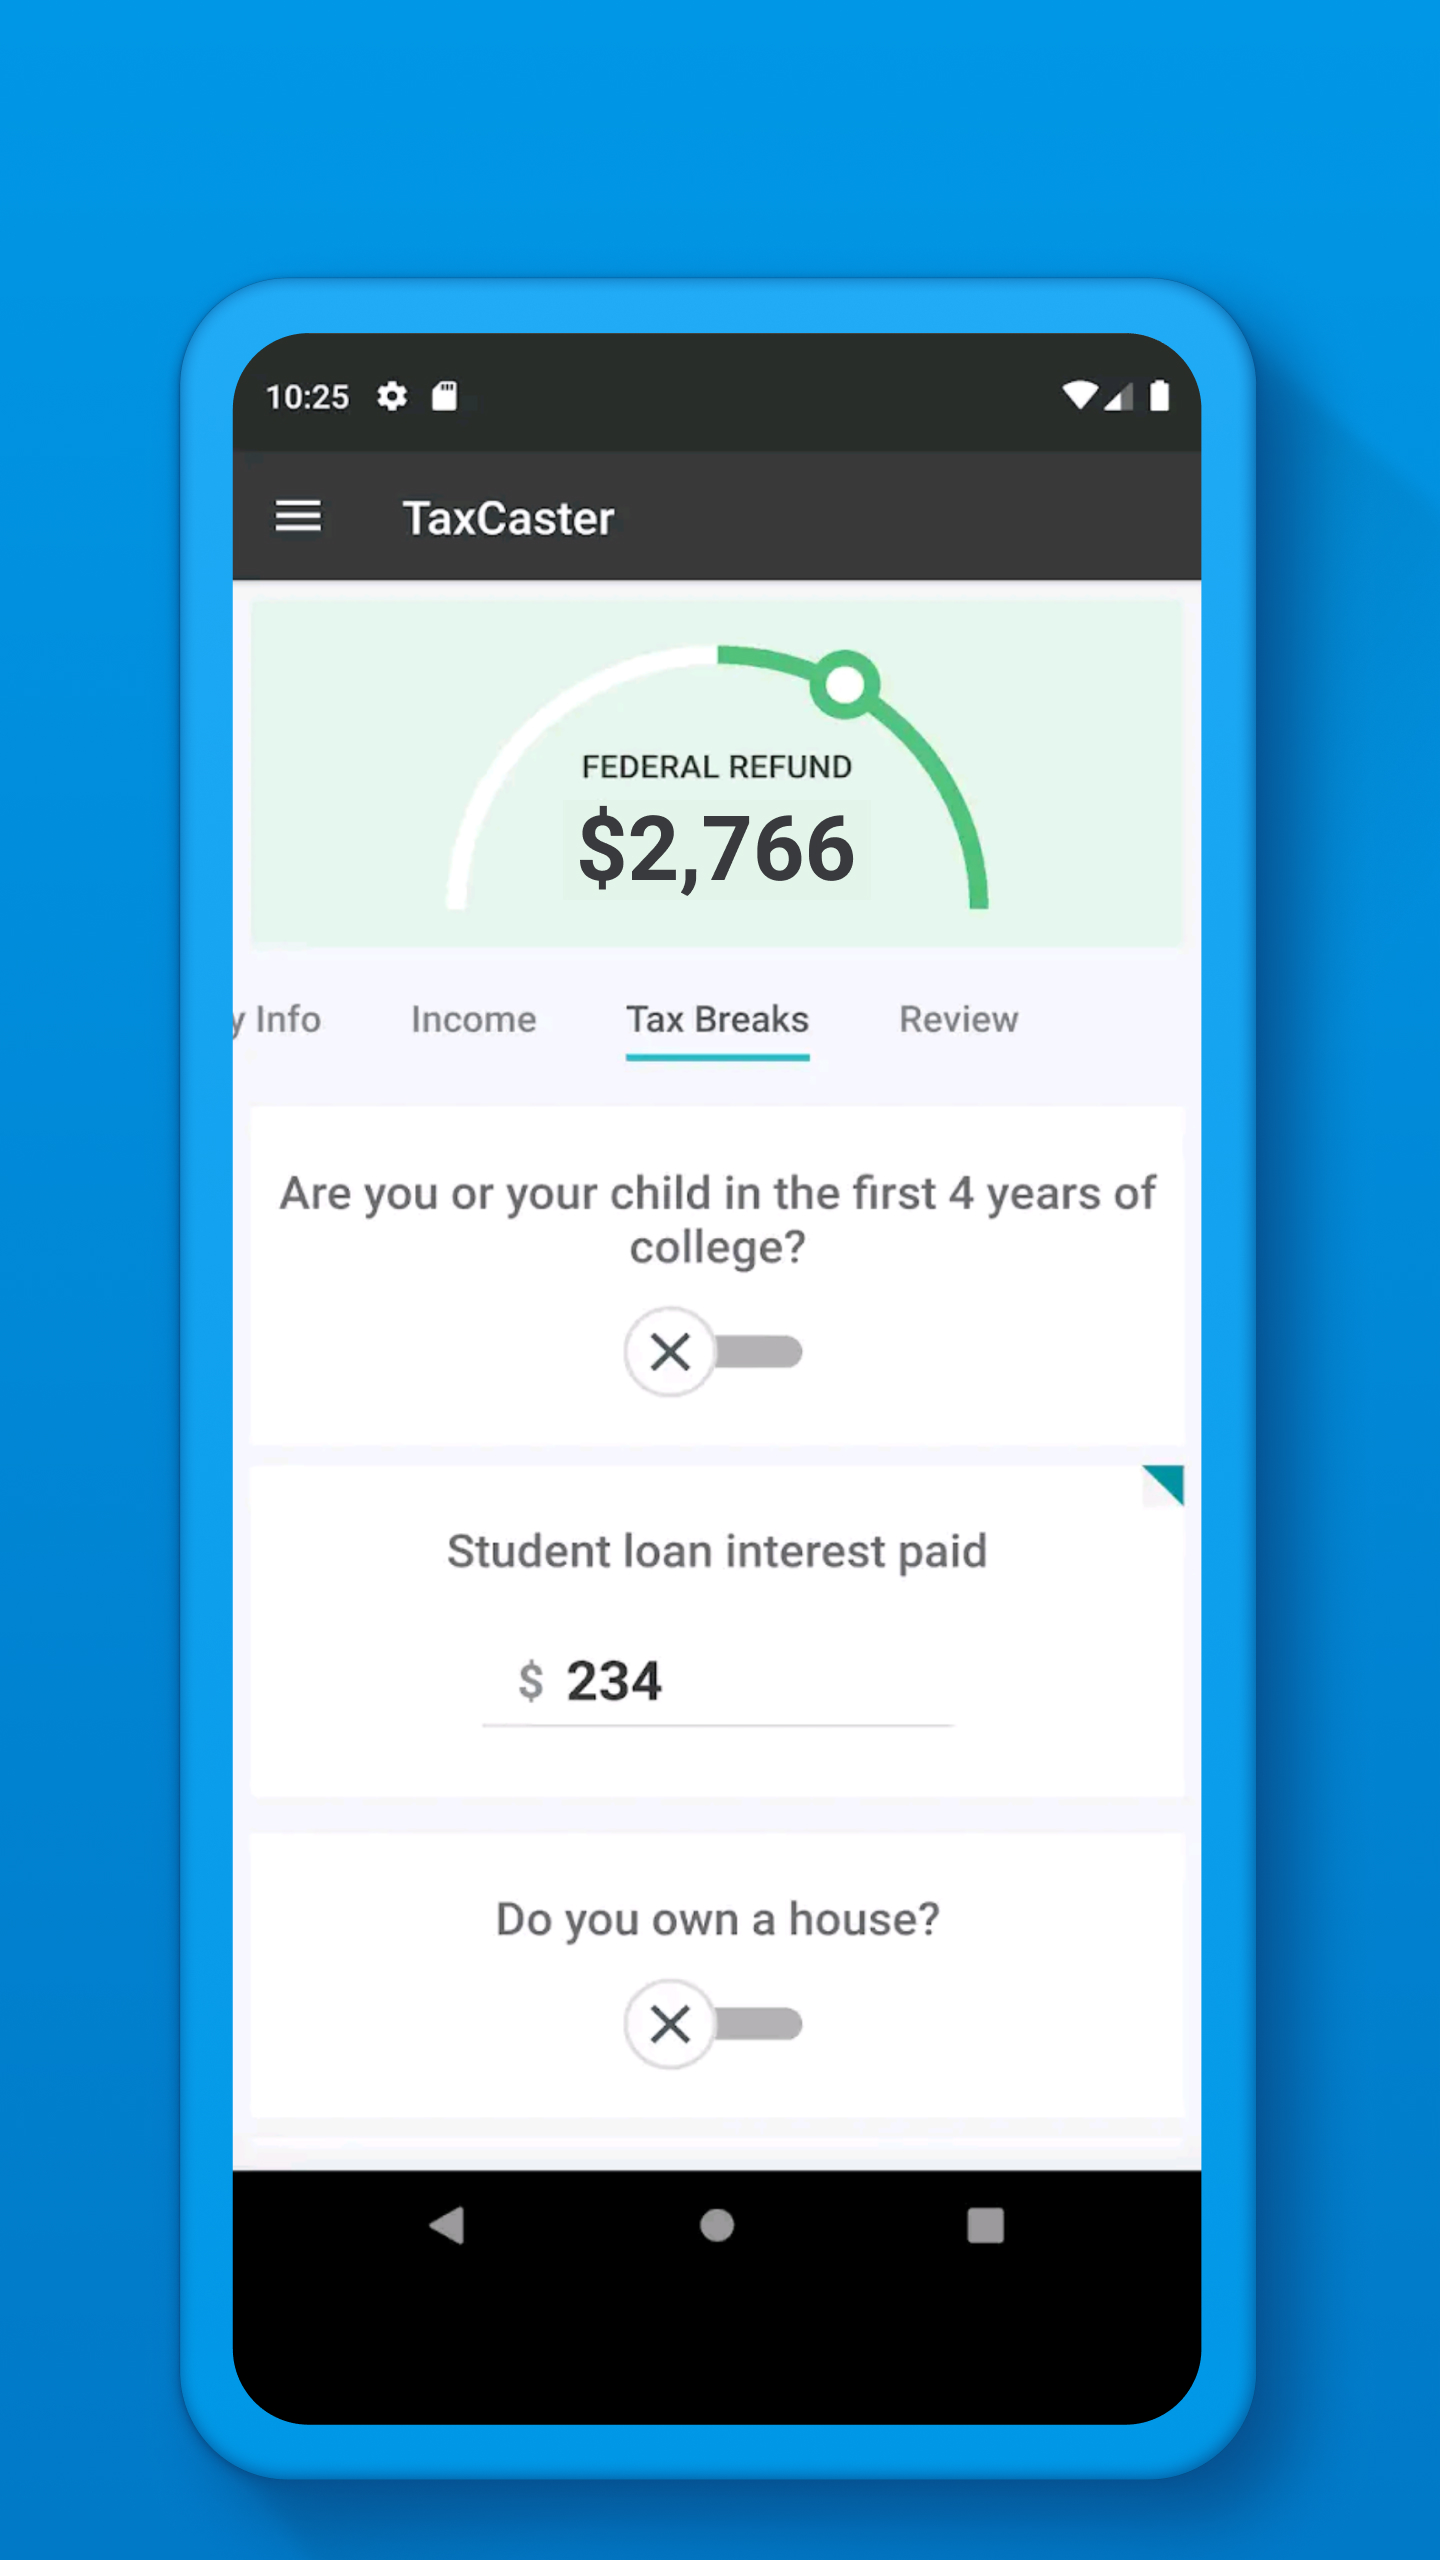 Android application TaxCaster by TurboTax screenshort